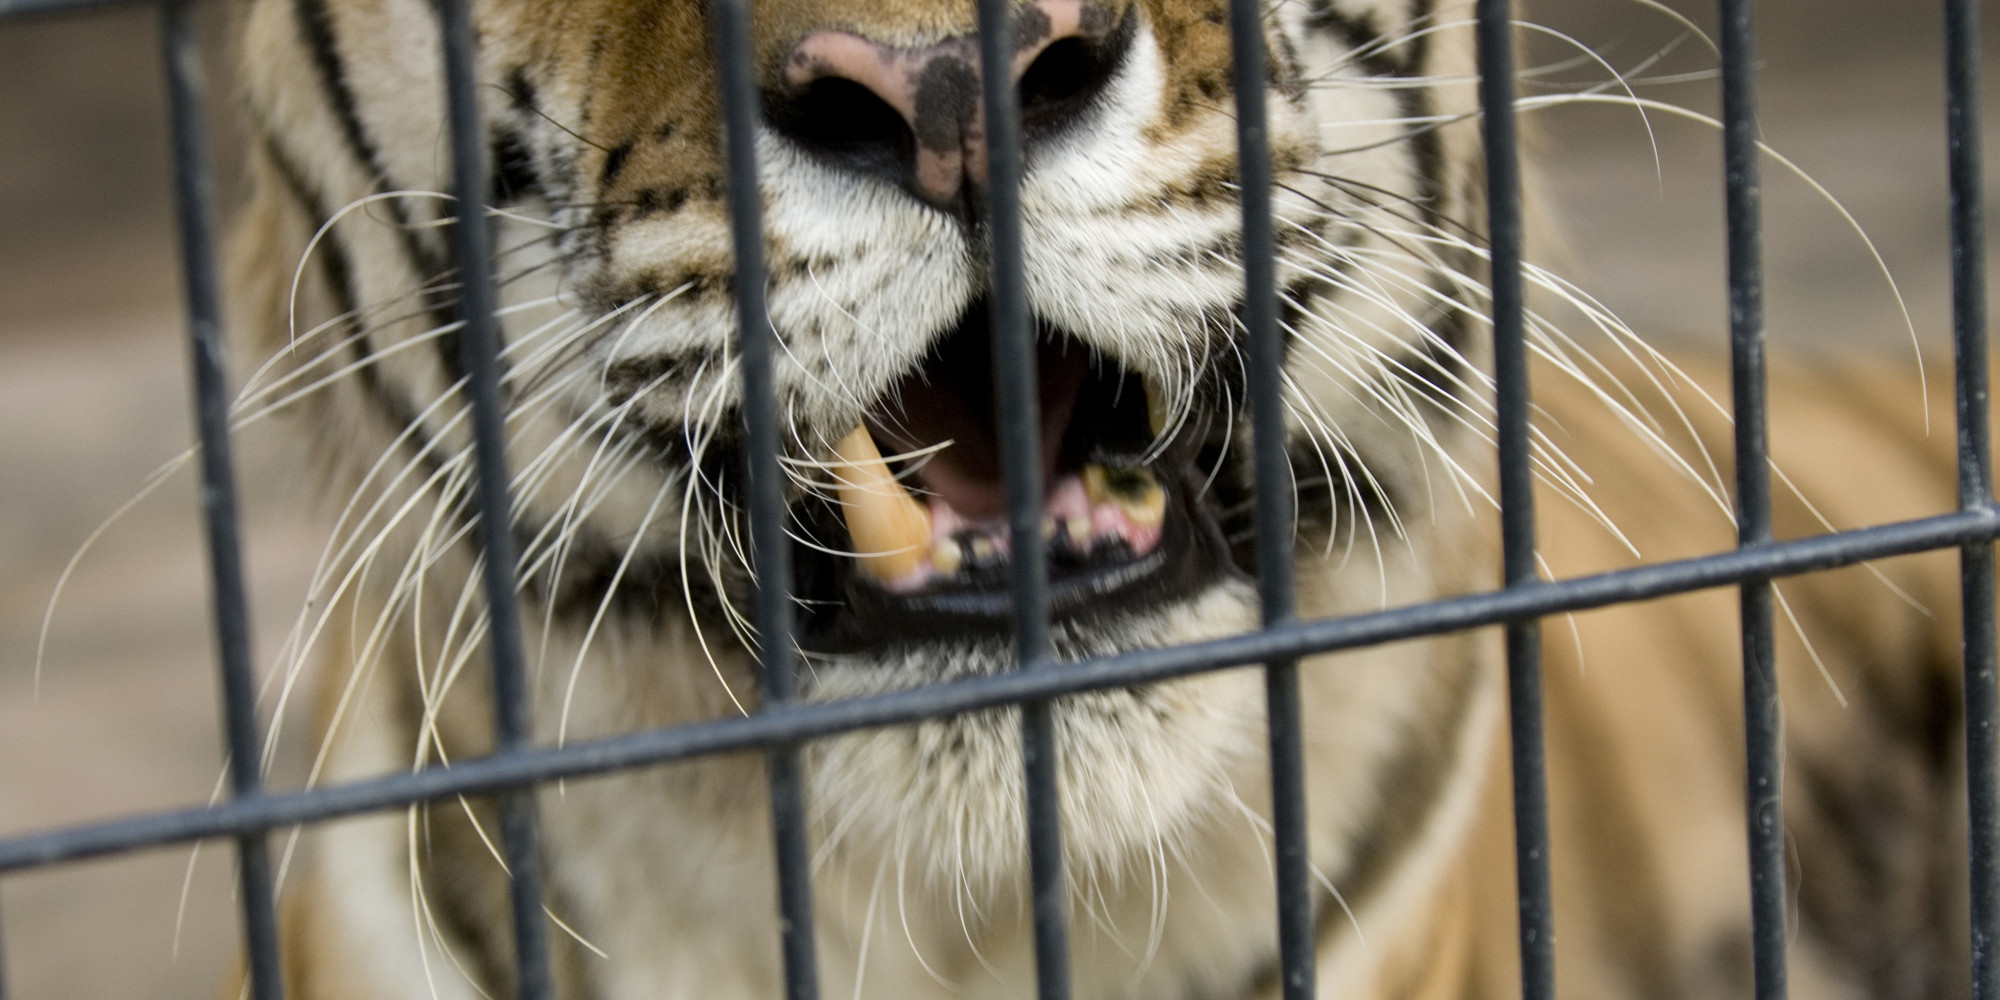 Tiger Attack At Oklahoma Zoo Leaves Worker Injured After She Sticks ...